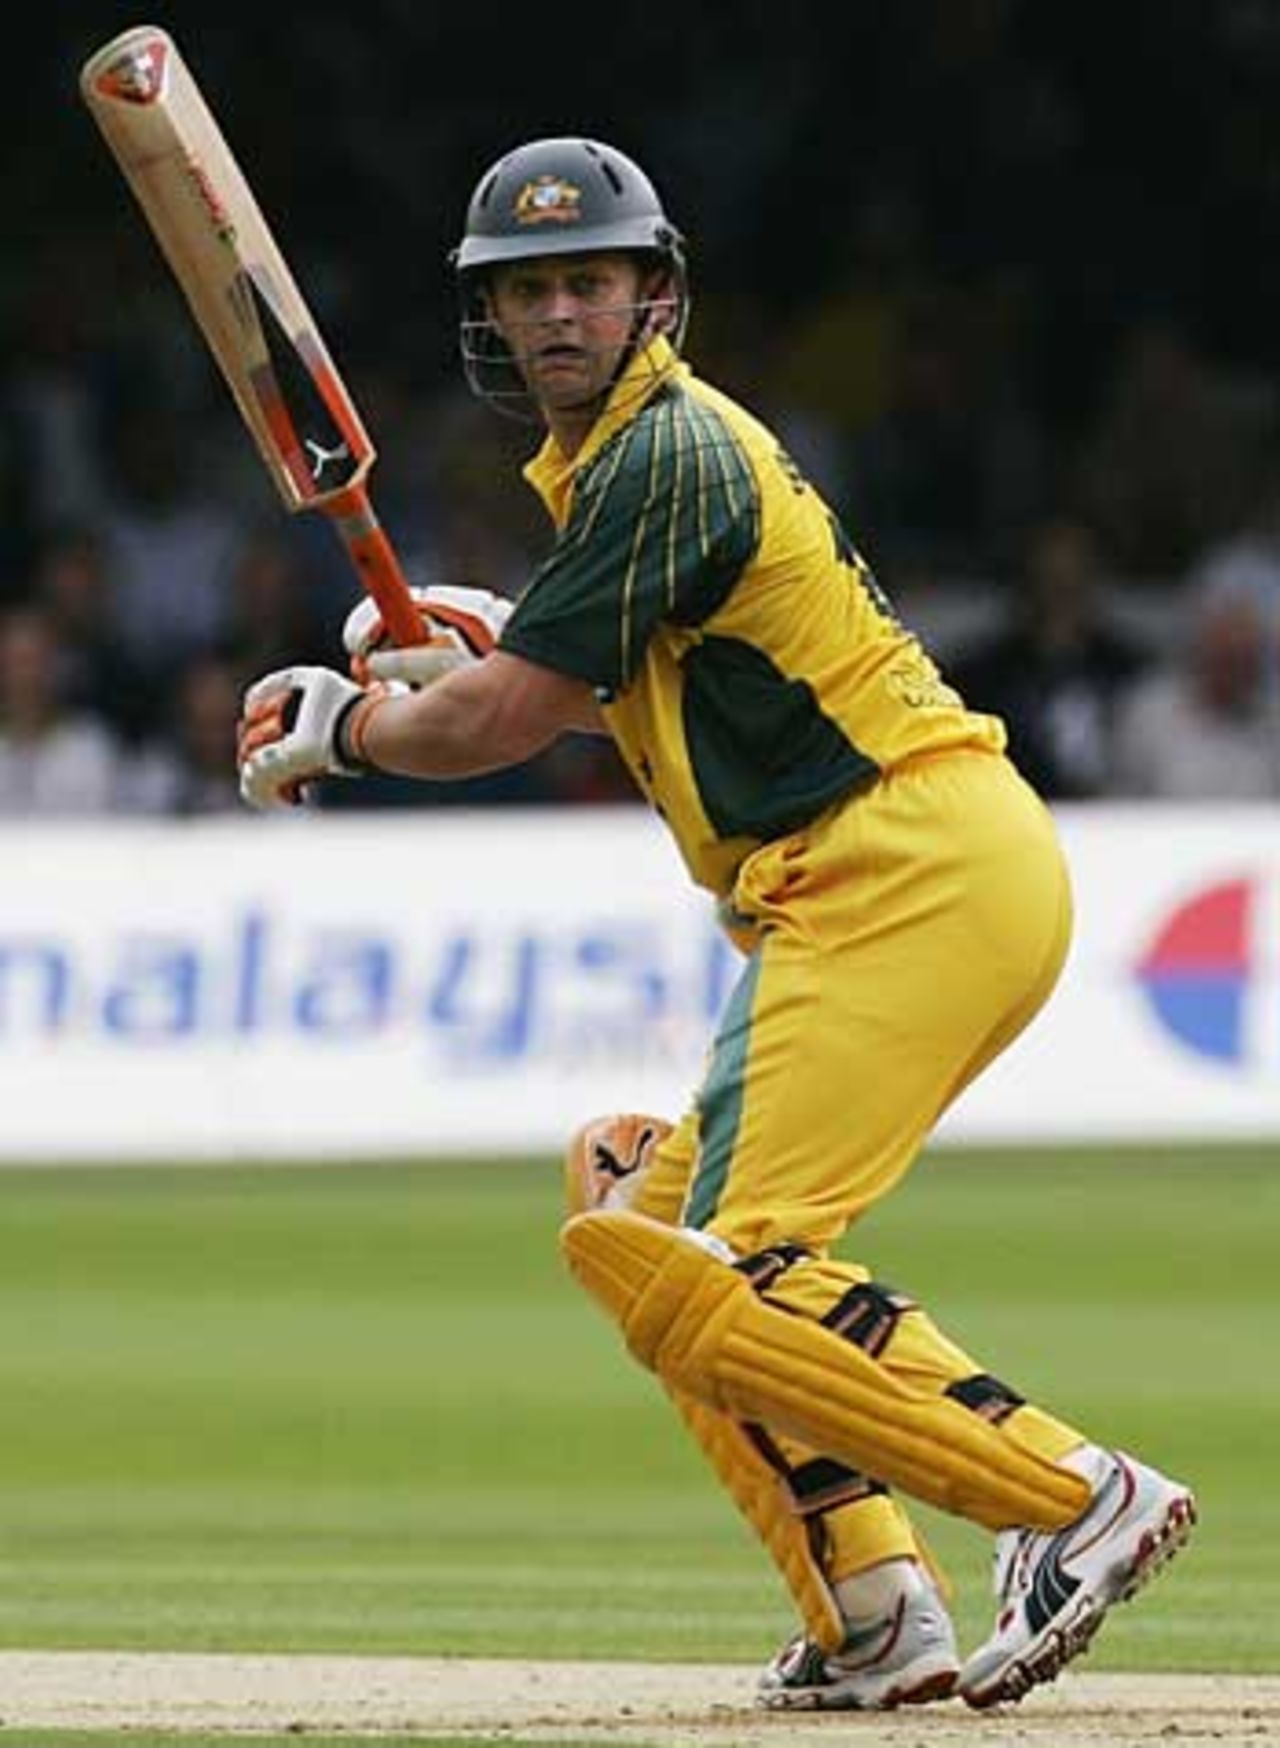 Adam Gilchrist watches an edge fly through the slips, England v Australia, NatWest Series final, Lord's, July 2